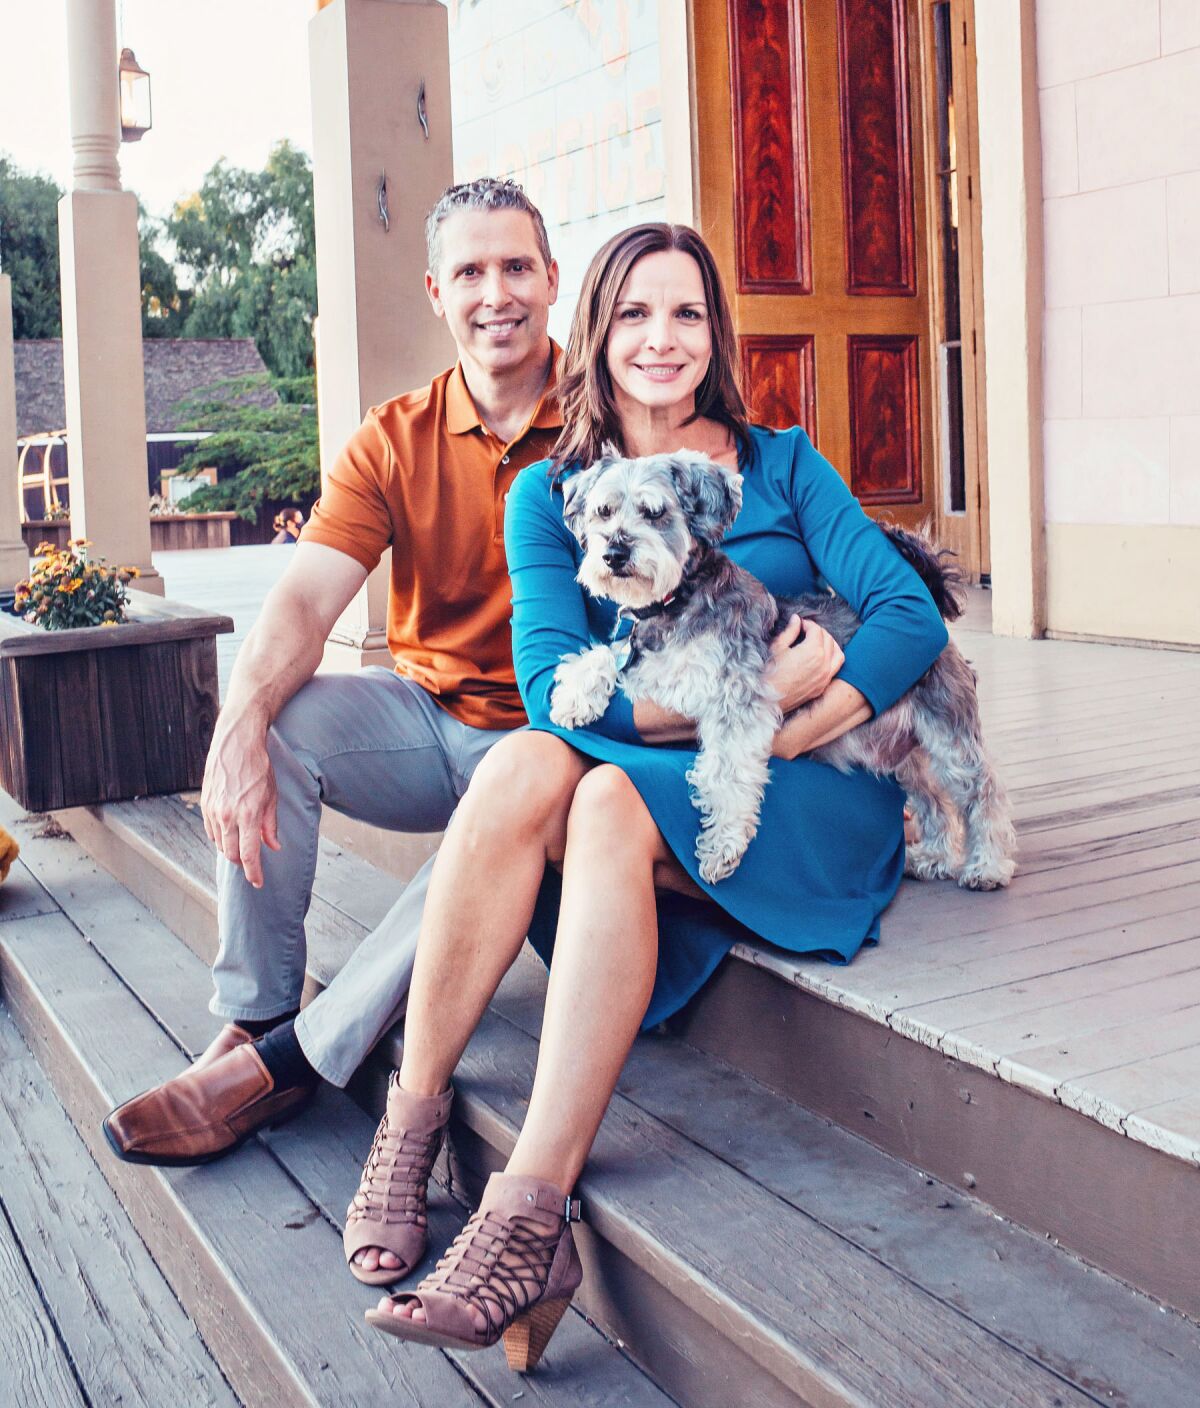 Michael Ziegelbauer and Jennifer Bennink had a “foster fail” with Buddy, meaning they adopted the pup.